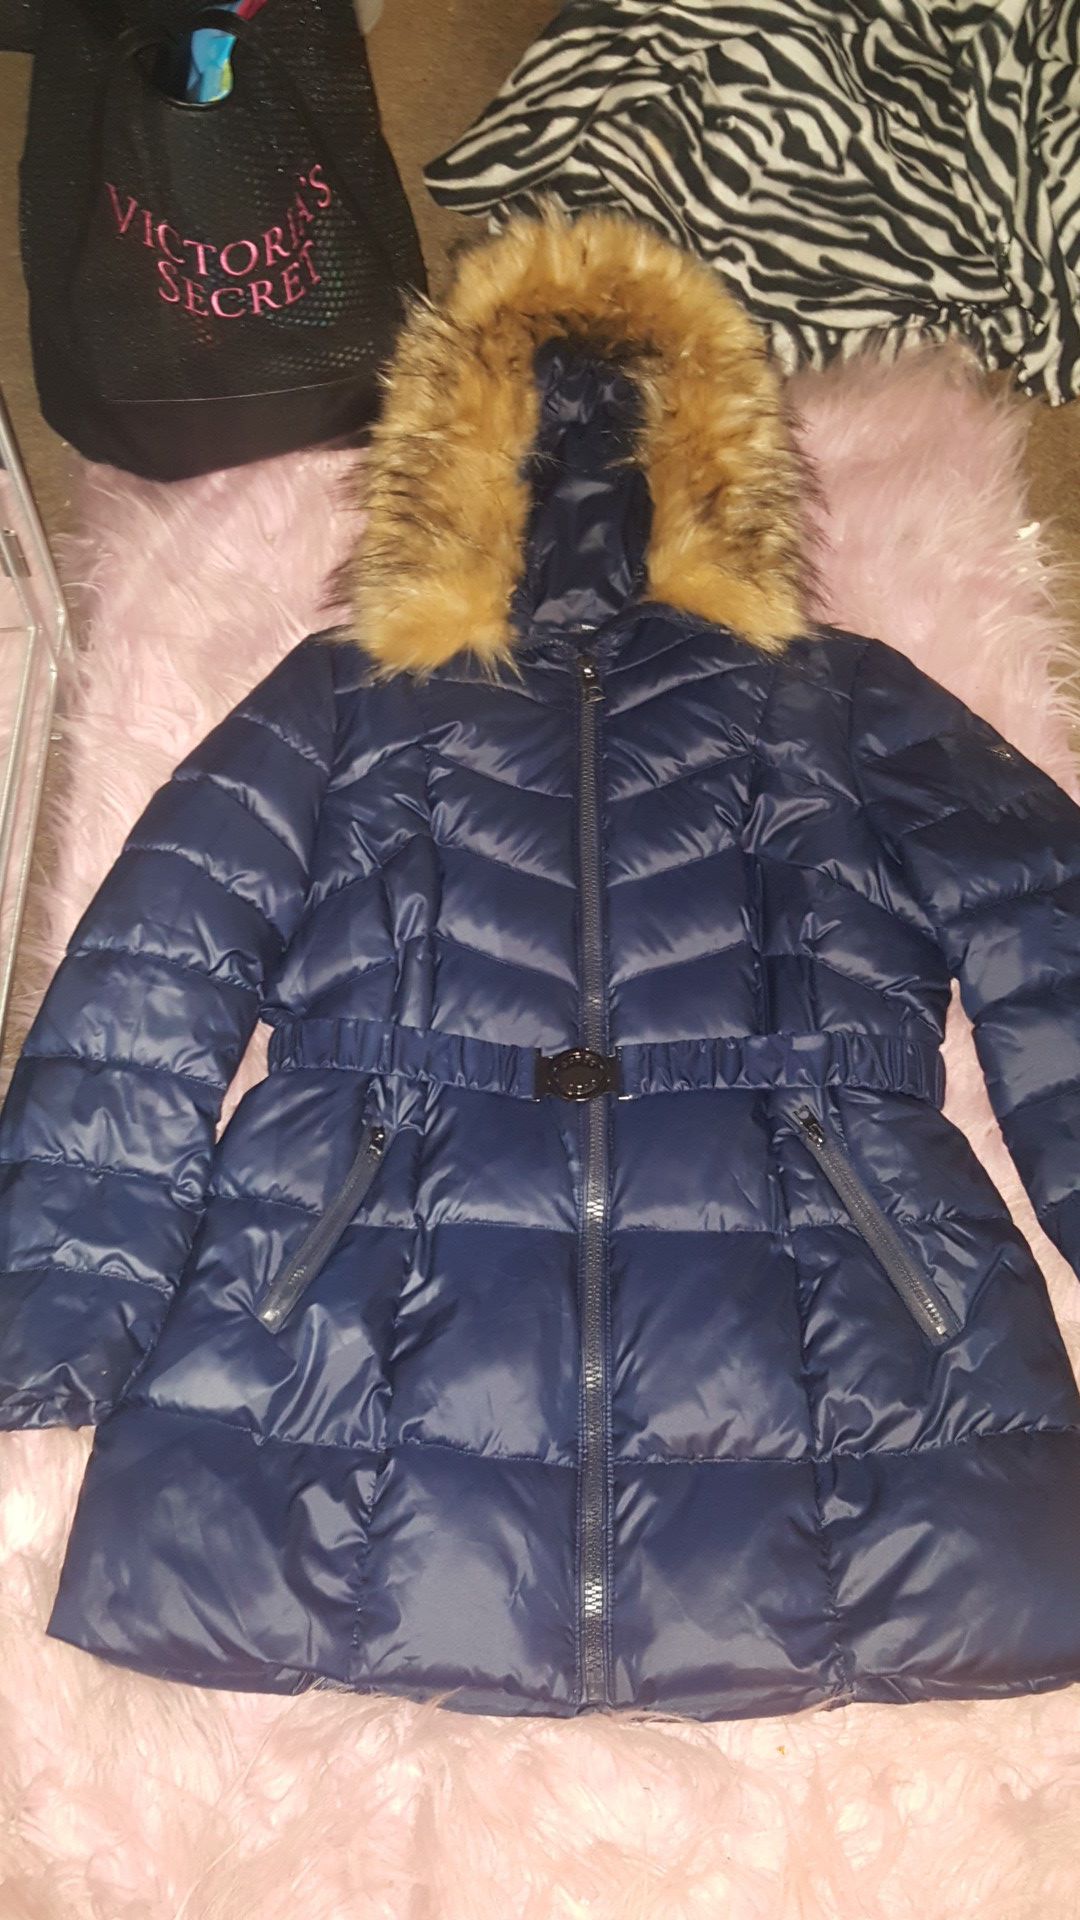 NWOT XL GUESS DEEP ROYAL BLUE PUFFER JACKET/COAT SIZE XL WITH DETACHABLE FUR ON HOOD.